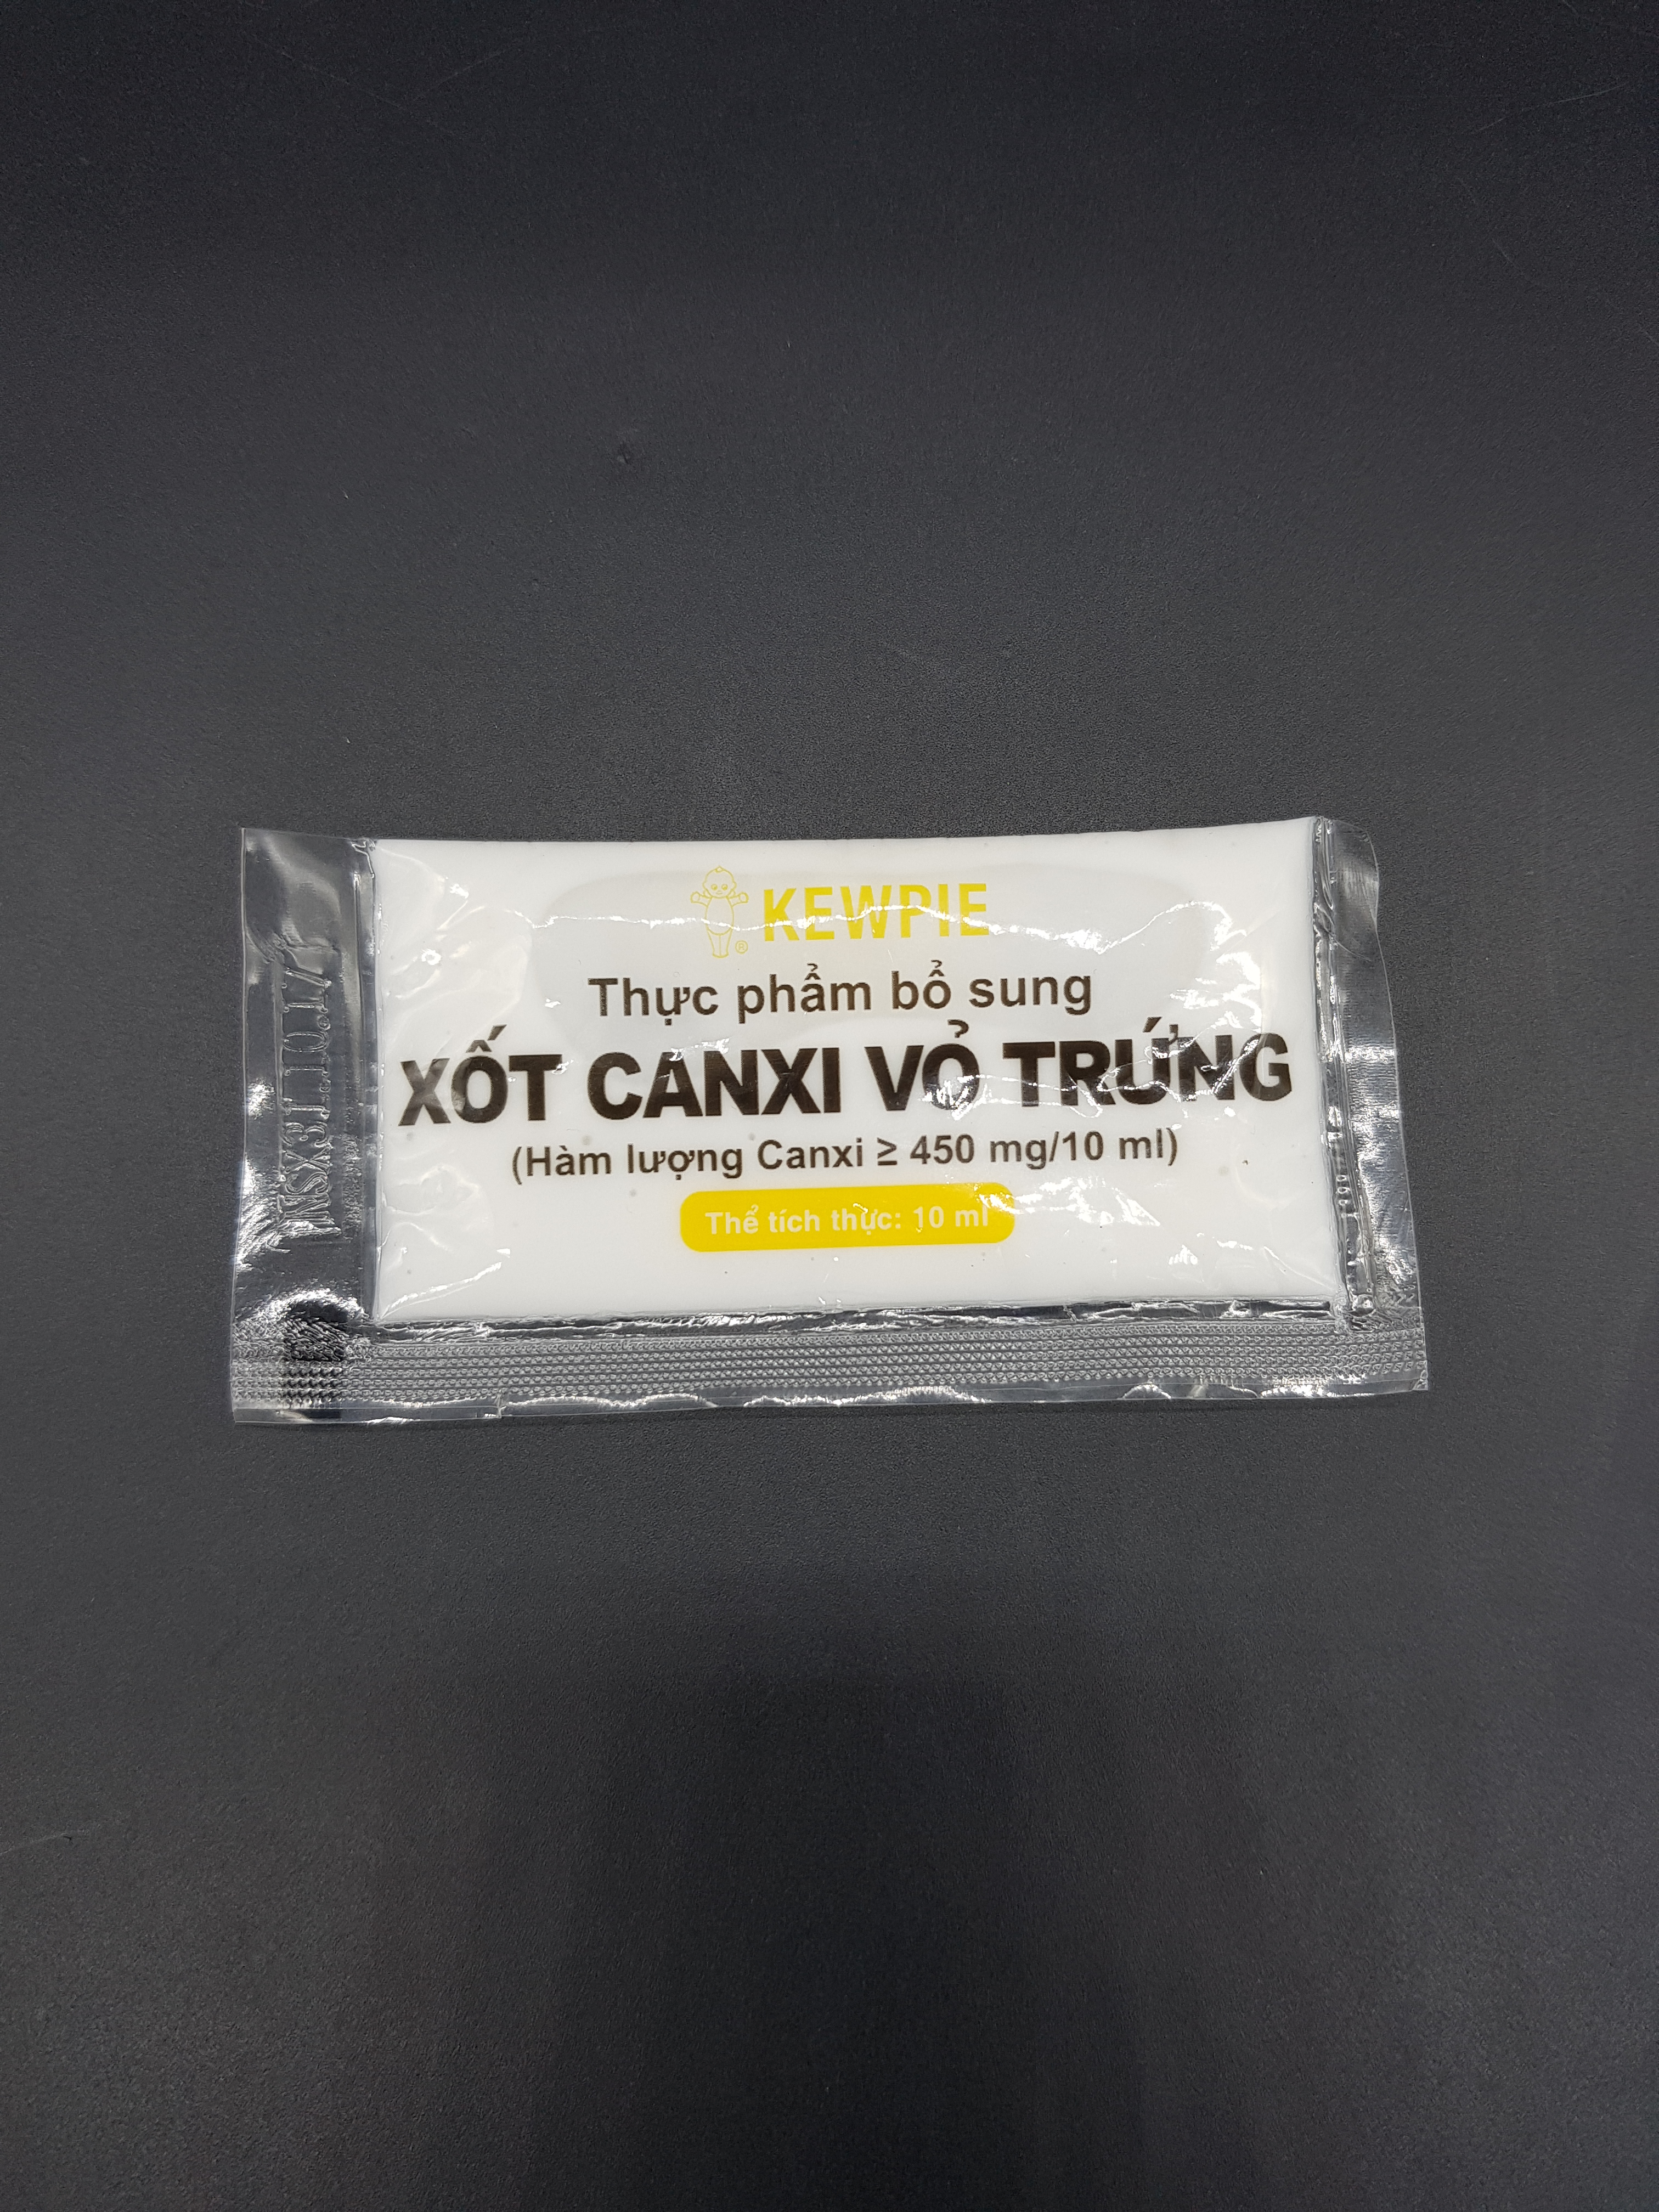 Xot-canxi-vo-trung